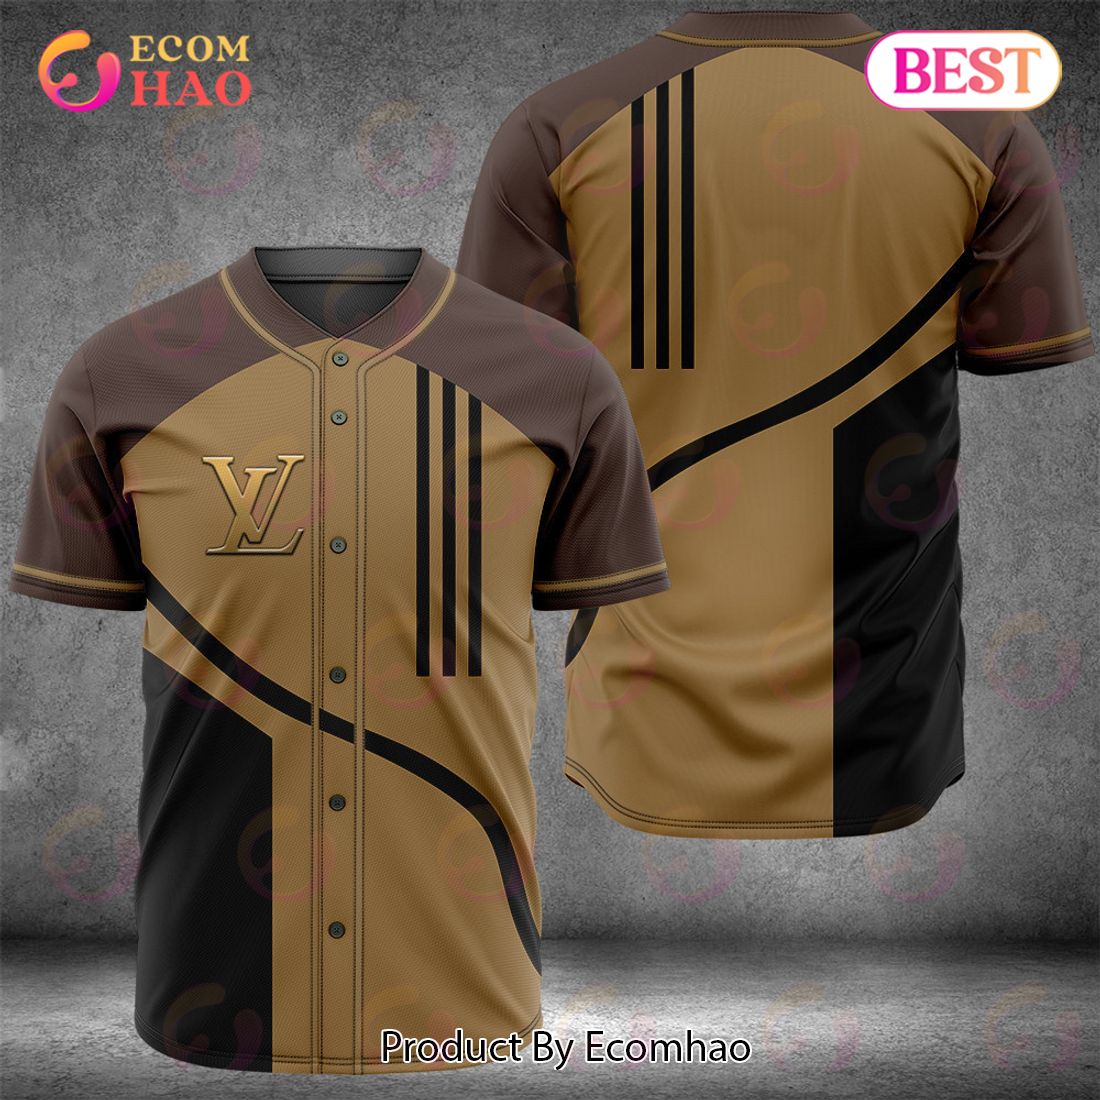 Louis Vuitton Dark Color Luxury Brand Jersey Limited Edition